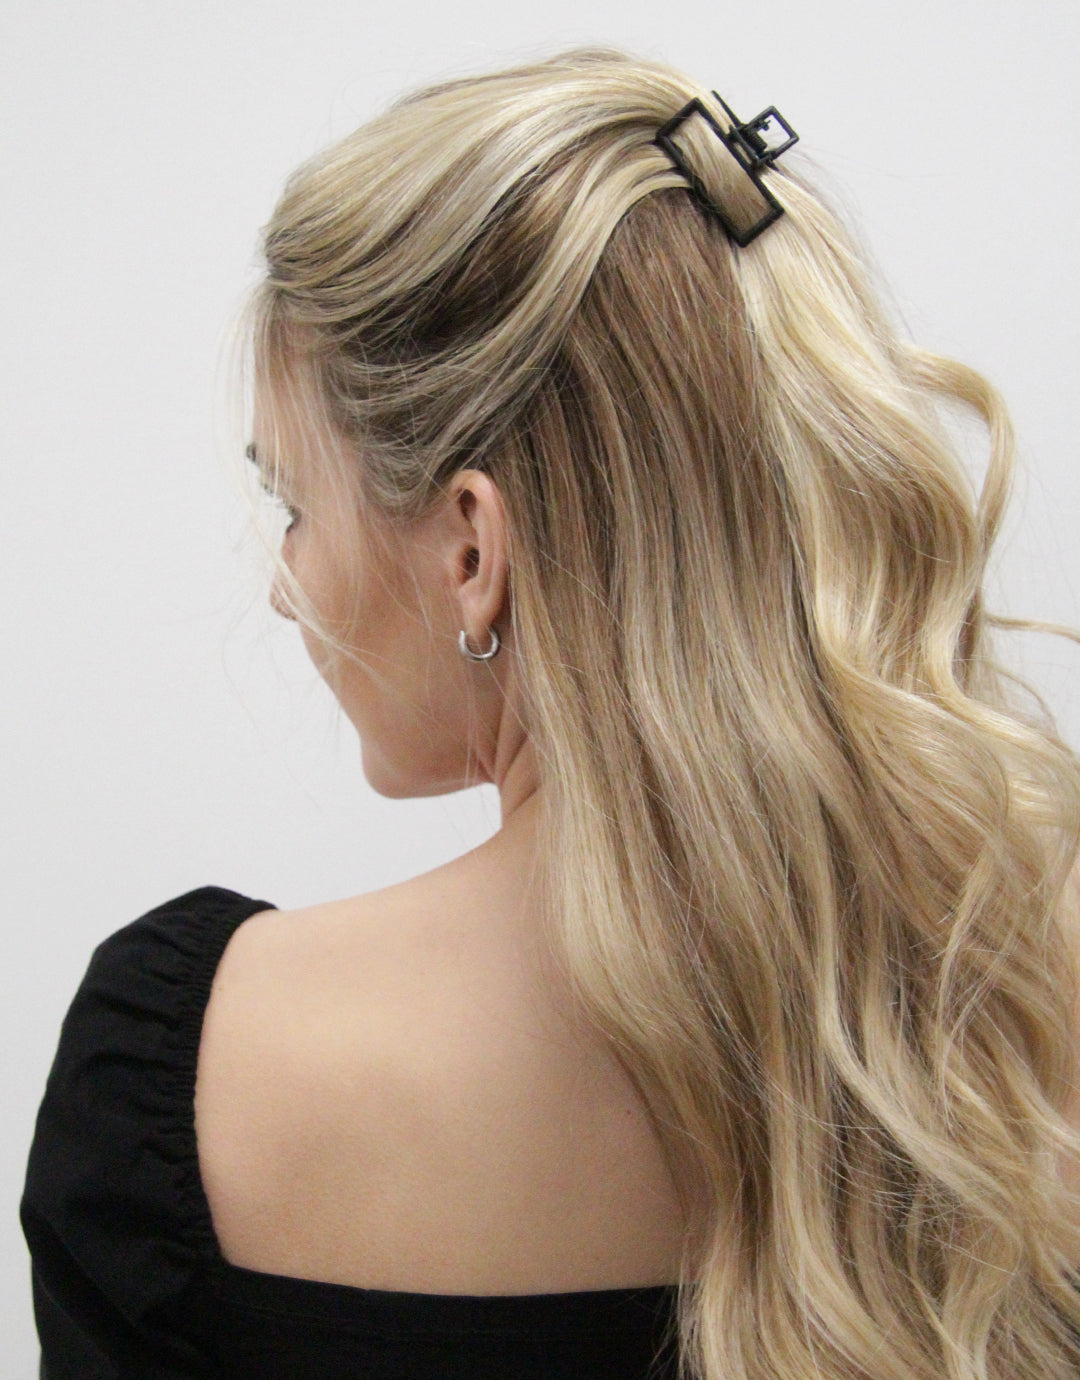 Modern claw clip hairstyles: Trendy hairstyles with large and small hair  accessories!